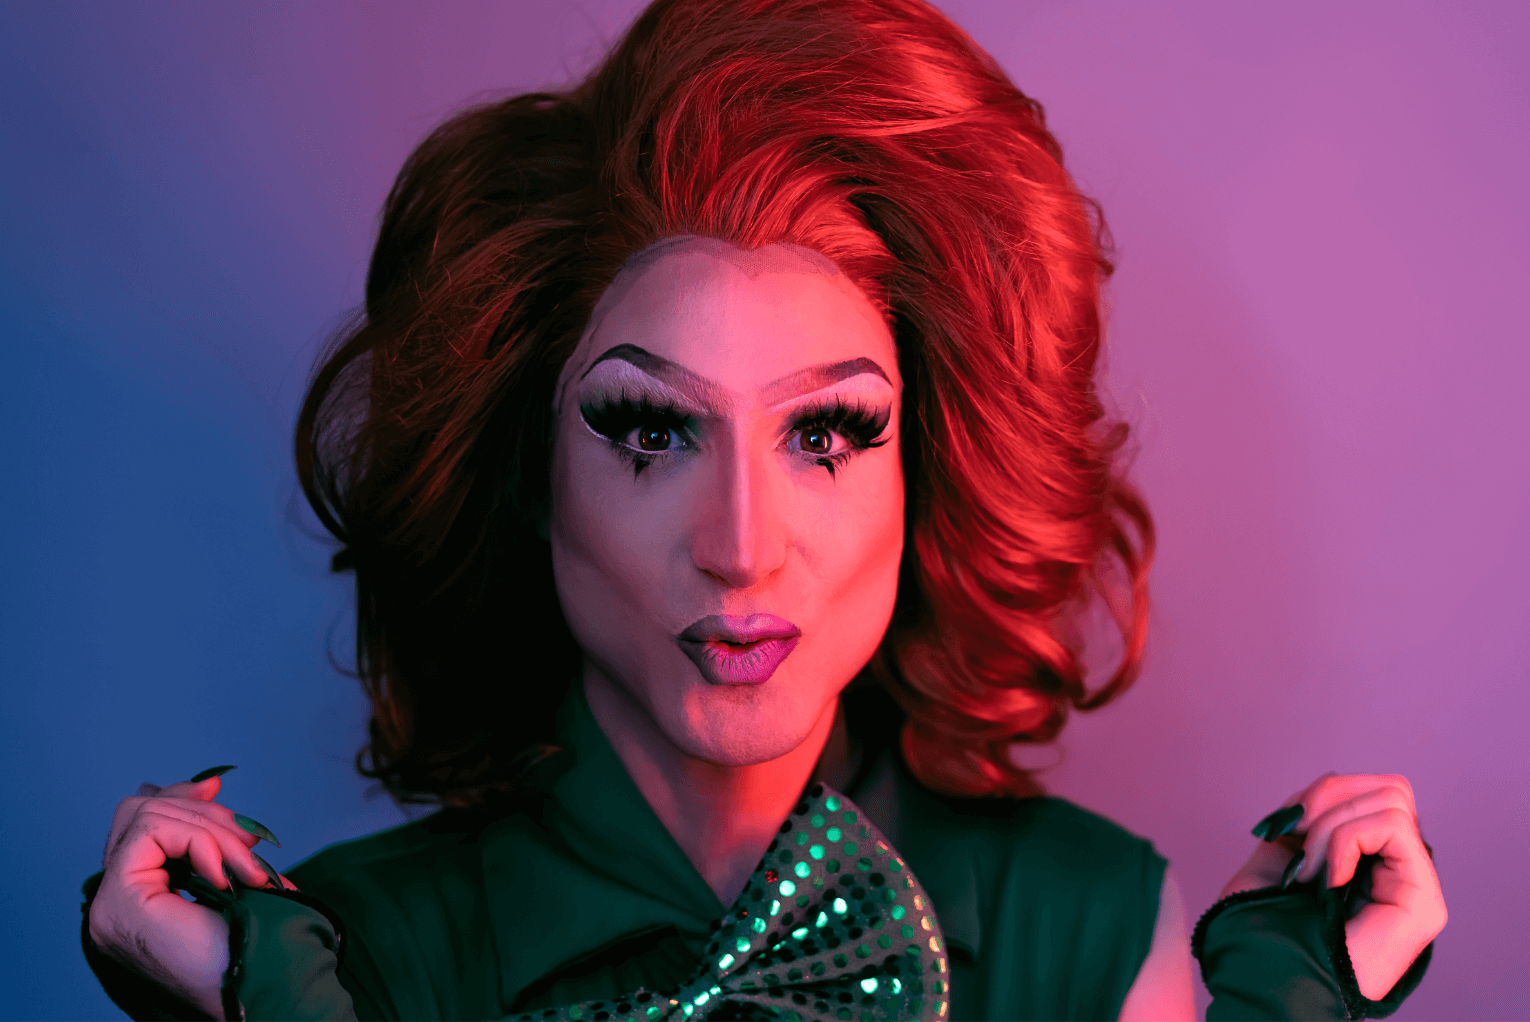 School Staff Removed Following Drag Queen’s Provocative Prom Performance